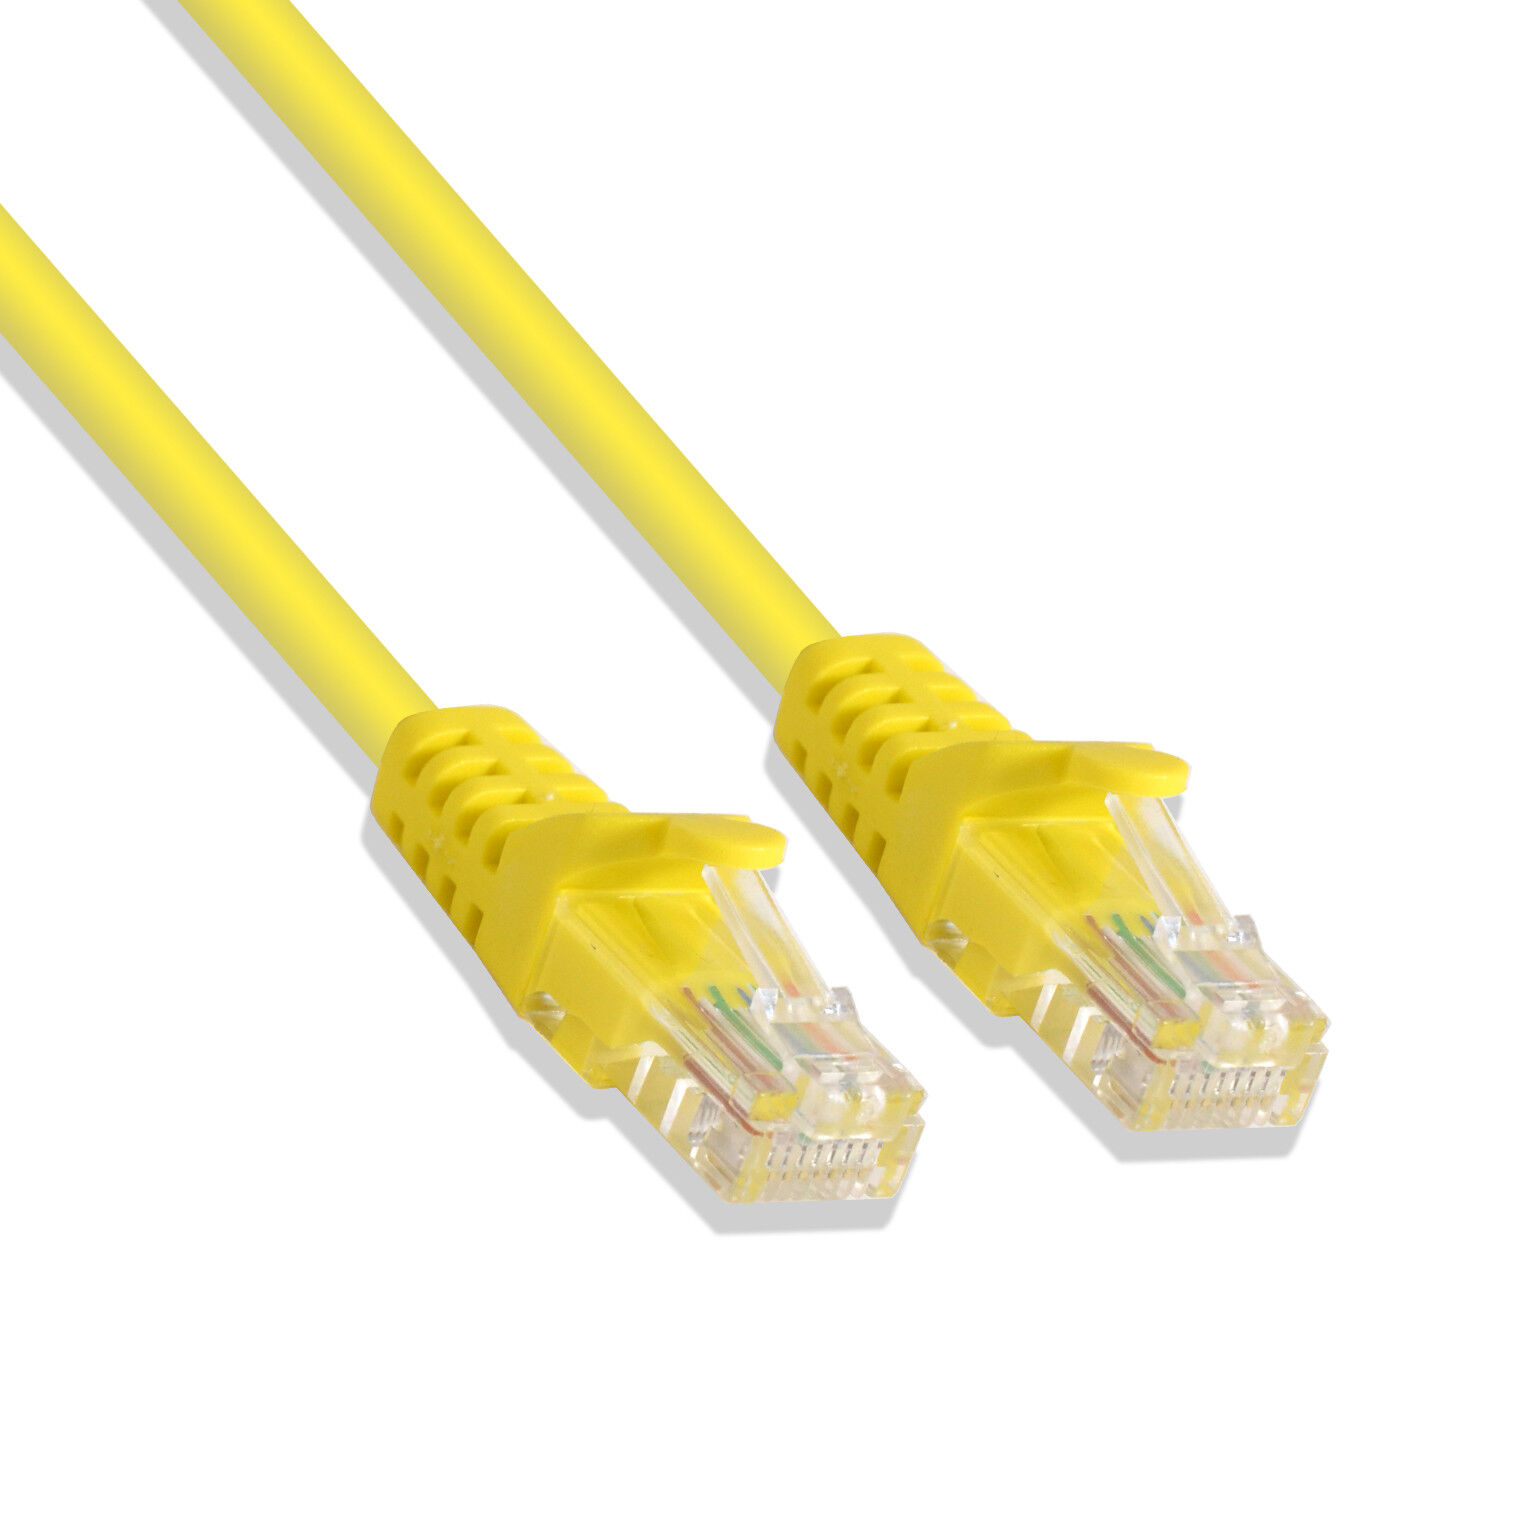 2ft Cat6 Cable Ethernet Lan Network RJ45 Patch Cord Internet Yellow (50 Pack)